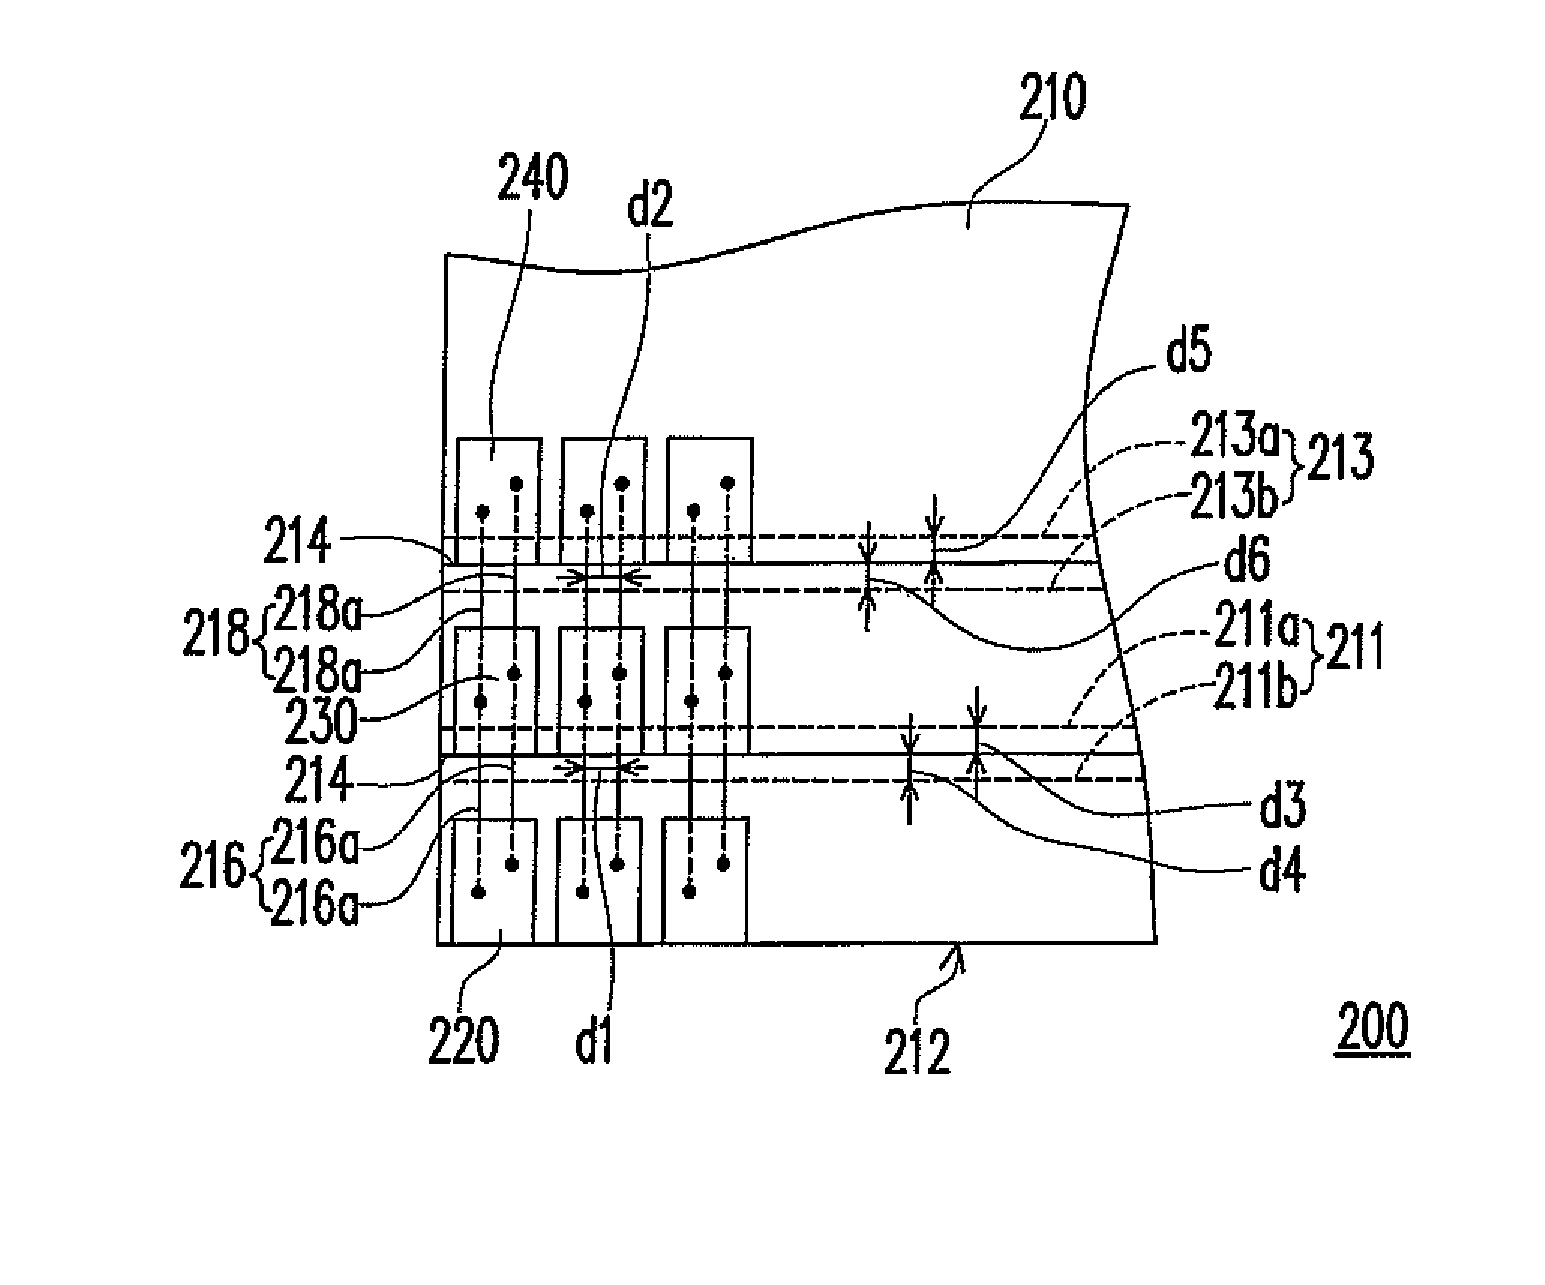 Circuit board having at least one auxiliary scribed line